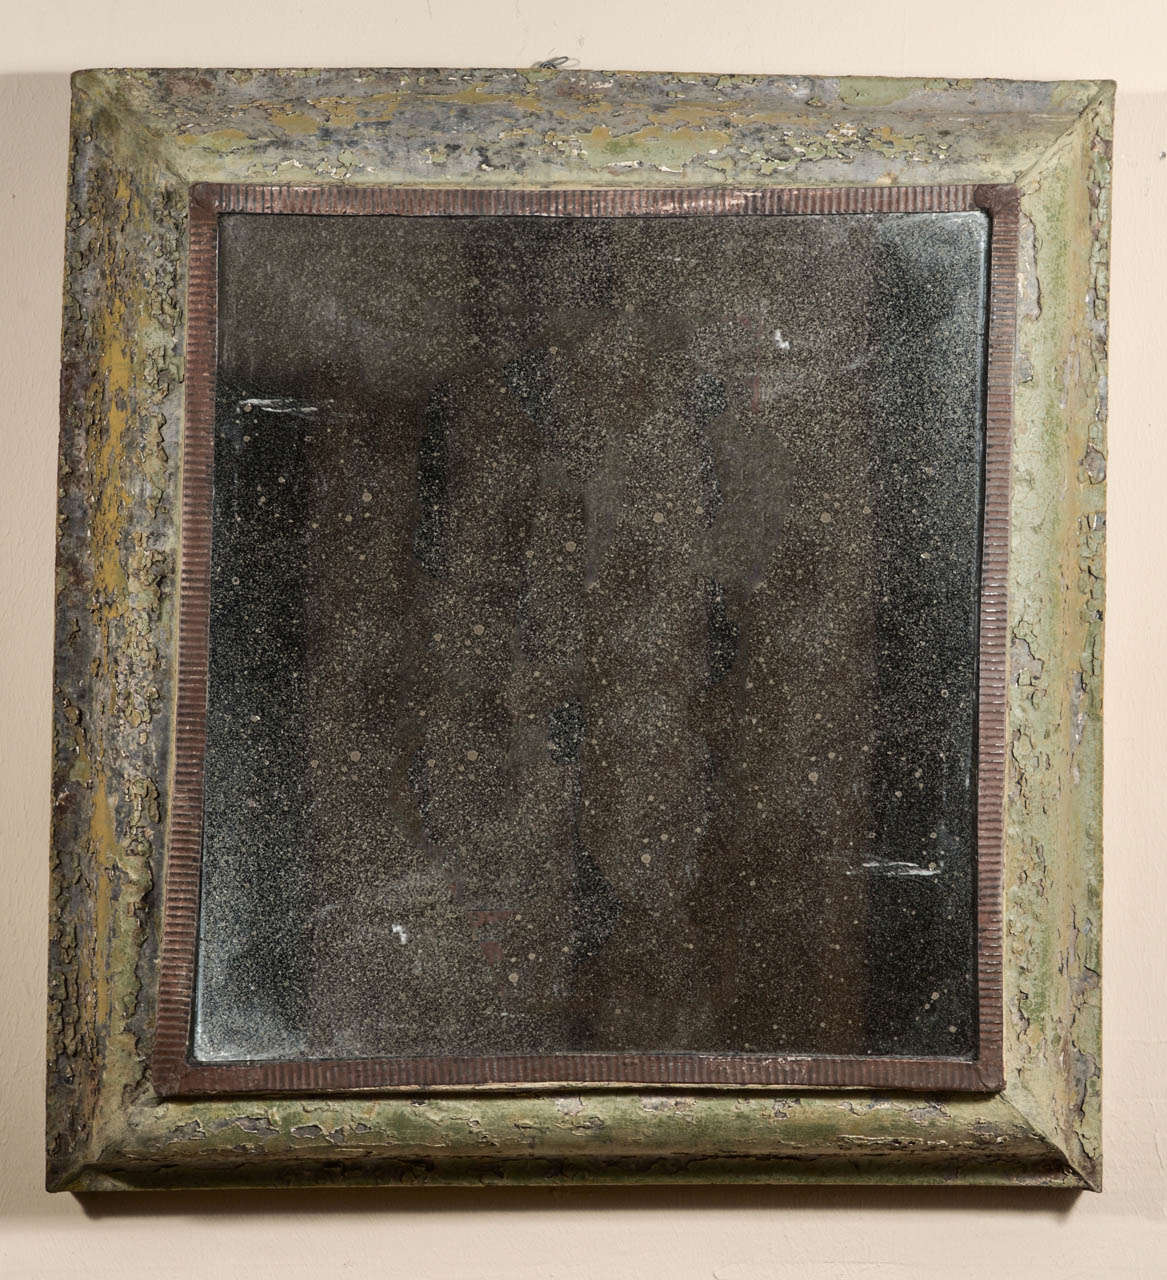 Zinc mirror frame with remnants of old paint and later plate.